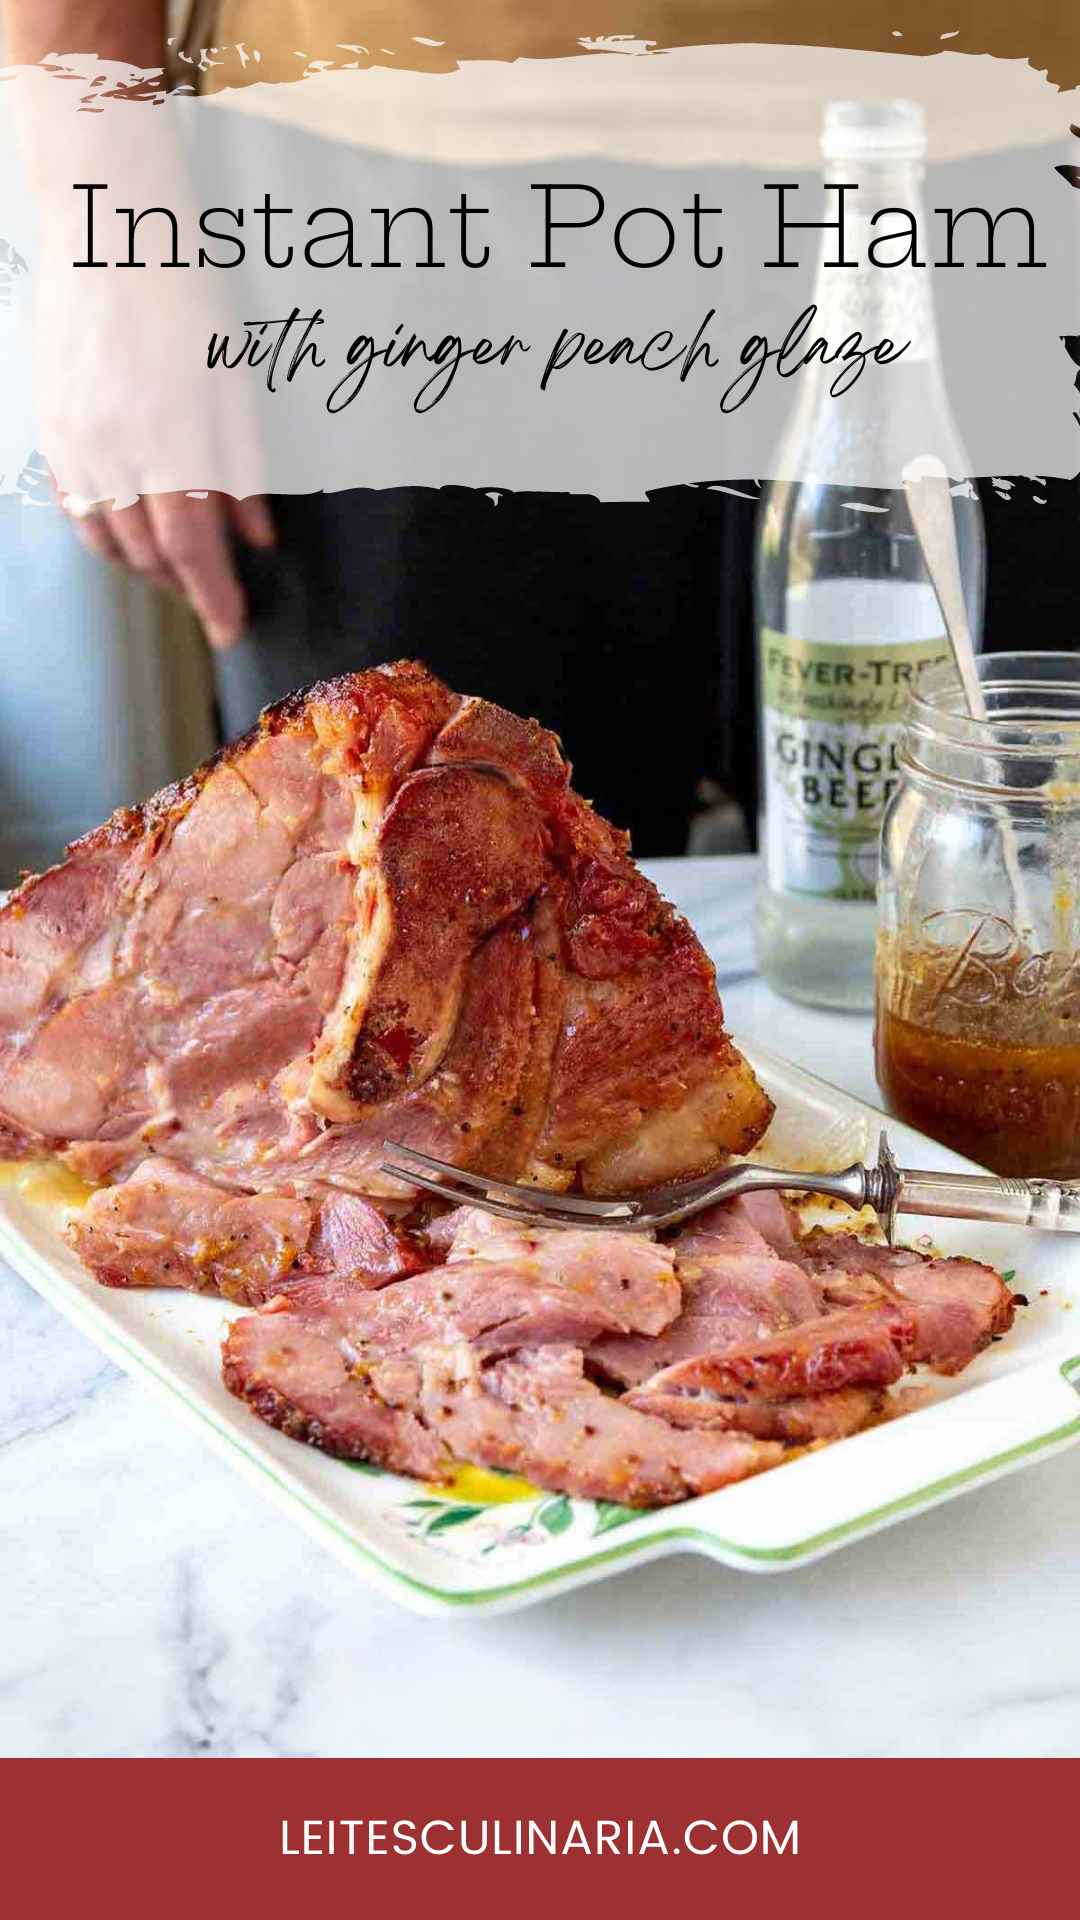 A partially carved Instant pot ham on a platter with a jar of glaze and bottle of ginger beer nearby.